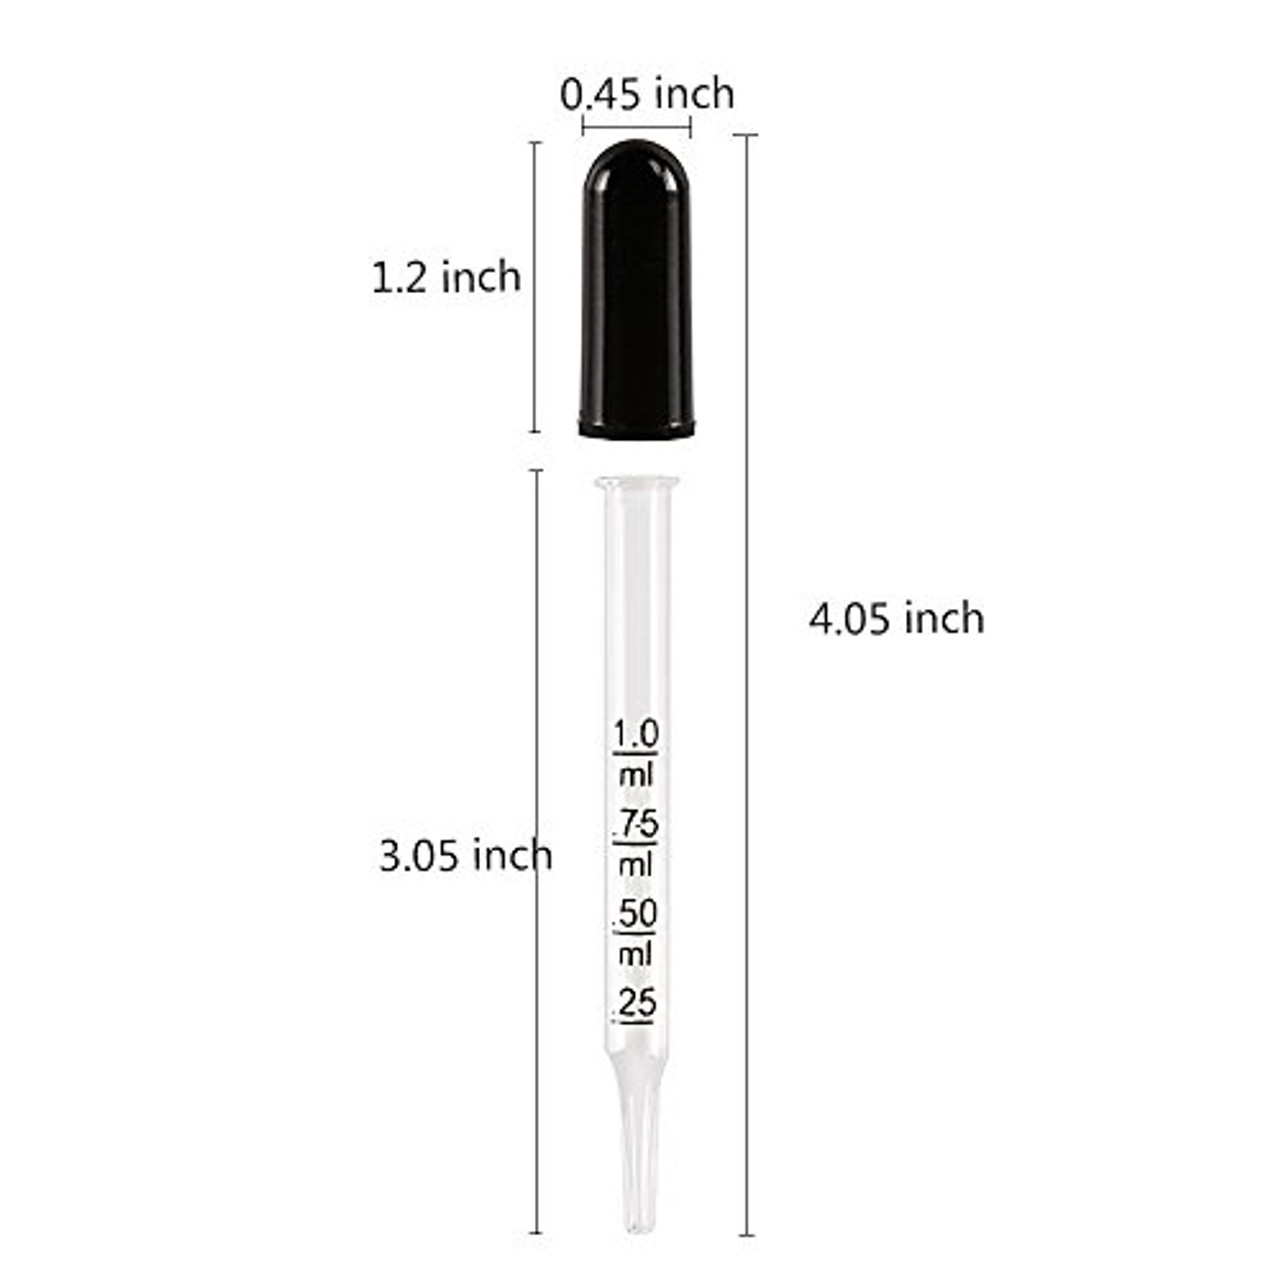 Glass Dropper Medicine 1ml, Teenitor Essential Oils Eye Dropper Pipette  Dropper with Black Suction Bulb, Straight-Tip Calibrated Droppers for  Medicine Art Liquid Plant Nutrients 20 Pack